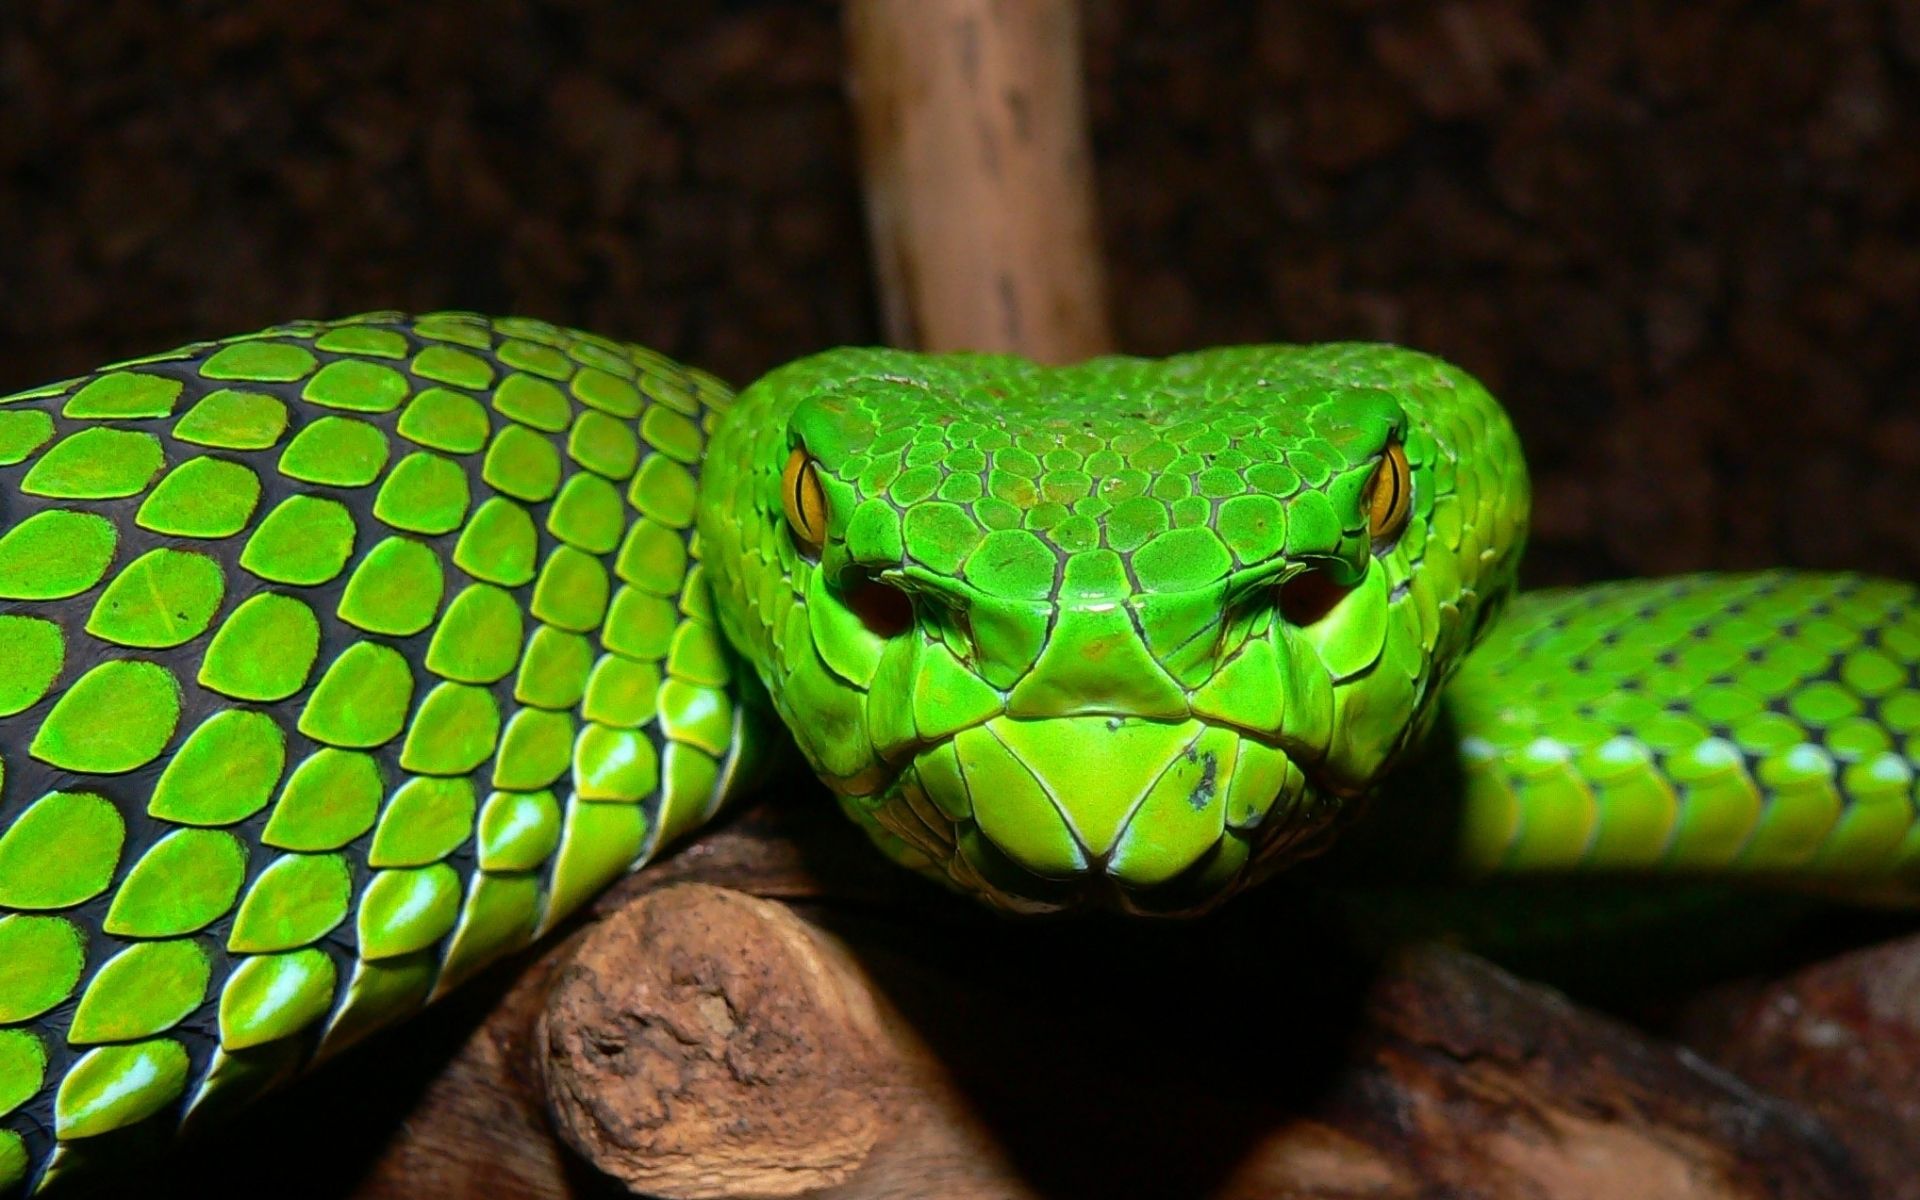 Animal Viper Reptiles Snakes Snake HD Wallpaper Background Image. Mini pigs, Pit viper, Most endangered animals